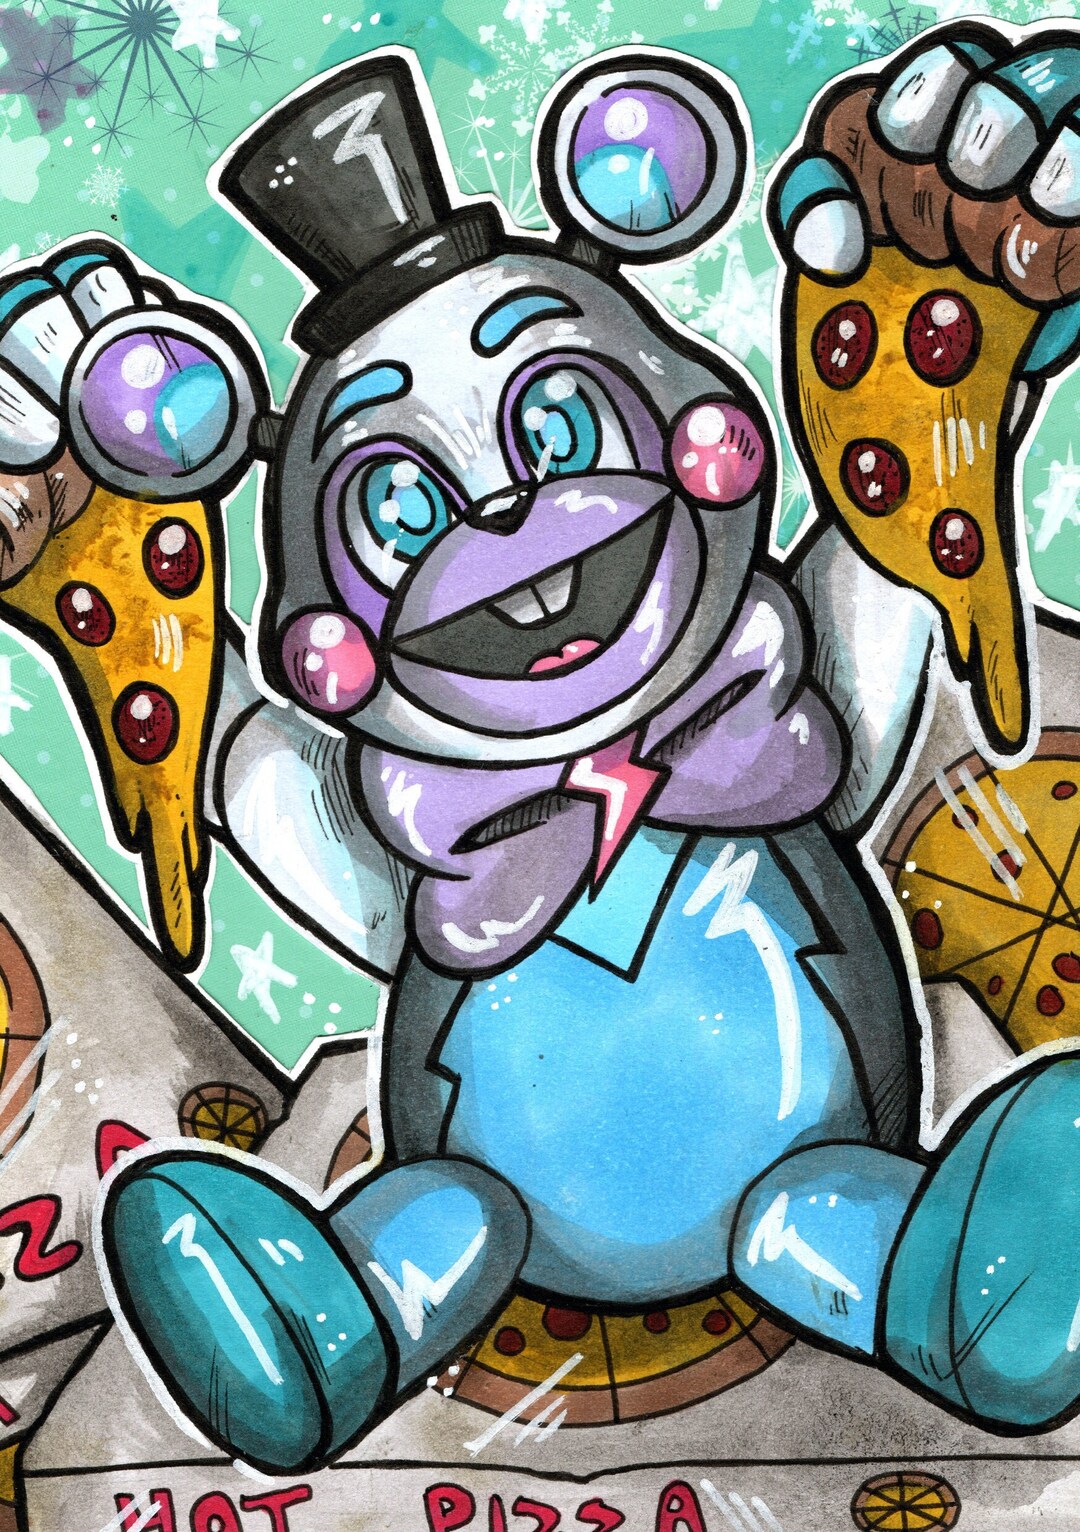 FNAF Funtime Chica 5x7in Art Print 